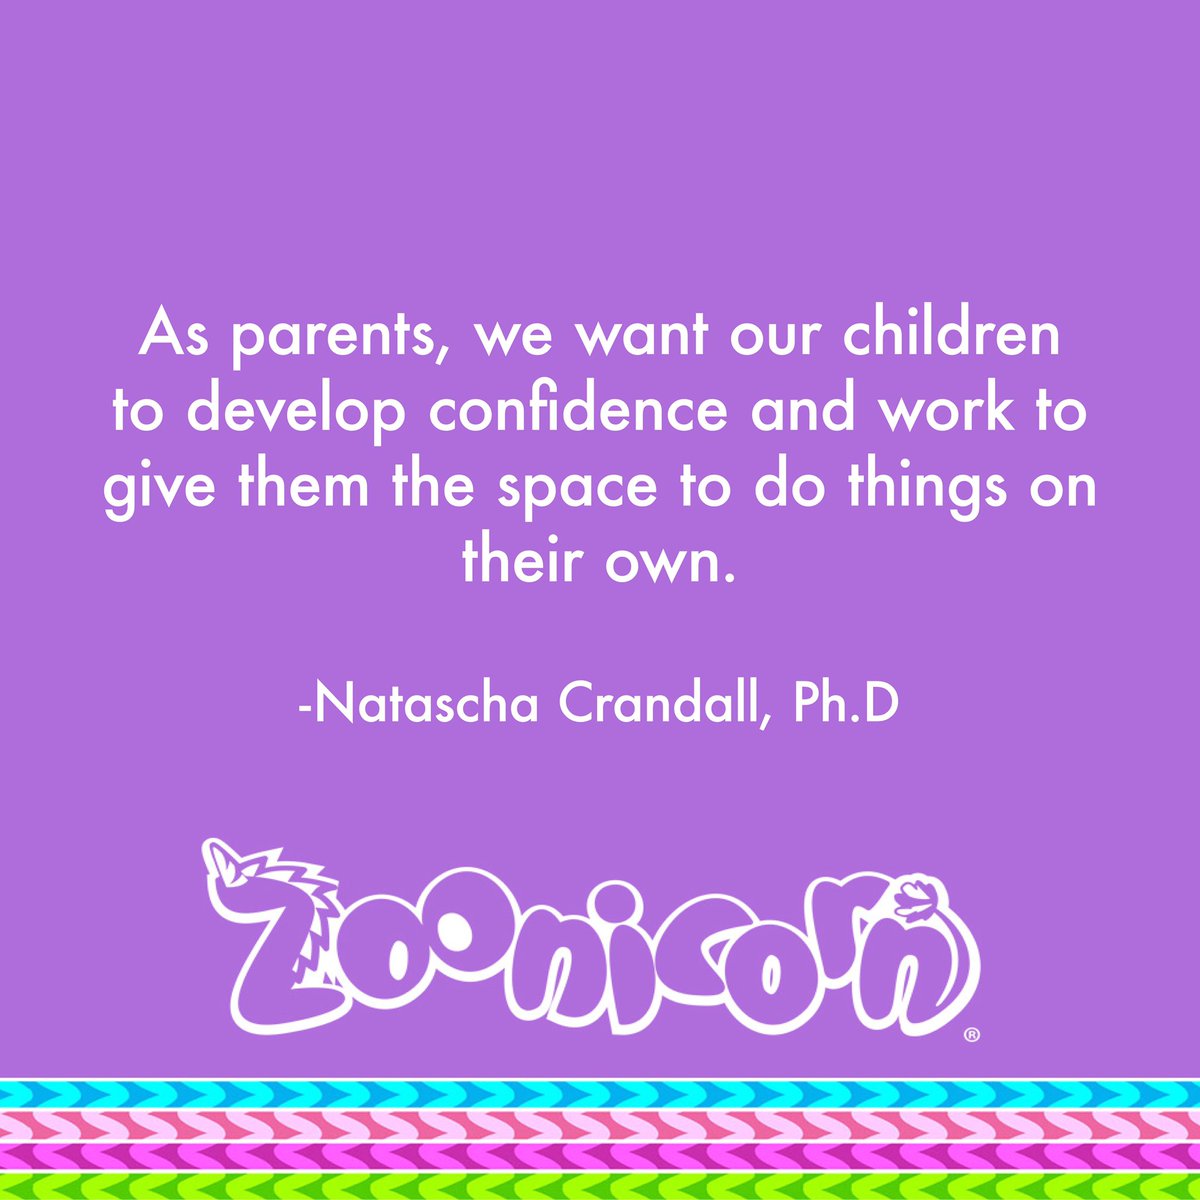 Here's a great parenting tip based on social emotional learning from our very own Educational Curriculum Consultant, Dr. Natascha Crandall, PhD!📚

#Zoonicorn #independence #gainingindependence #SocialEmotionalLearning #EducationalCurriculum
#Zooniverse #unicornworld #bestfriends